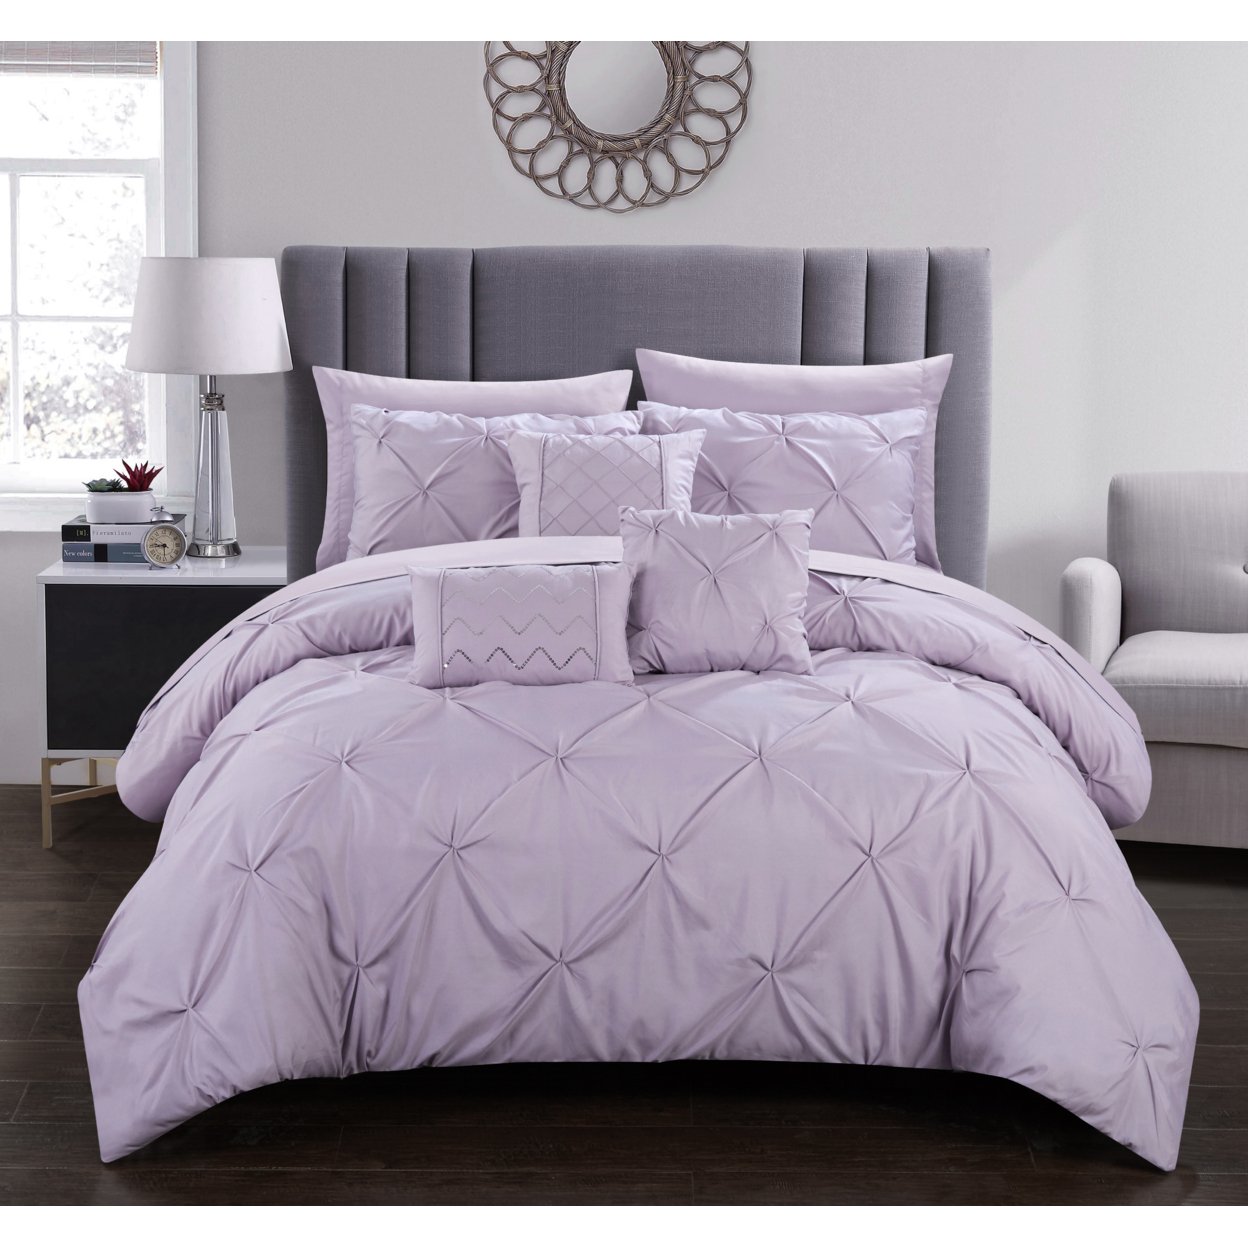 Alvatore Pinch Pleated Bed In A Bag Comforter Set - Lavender, Queen